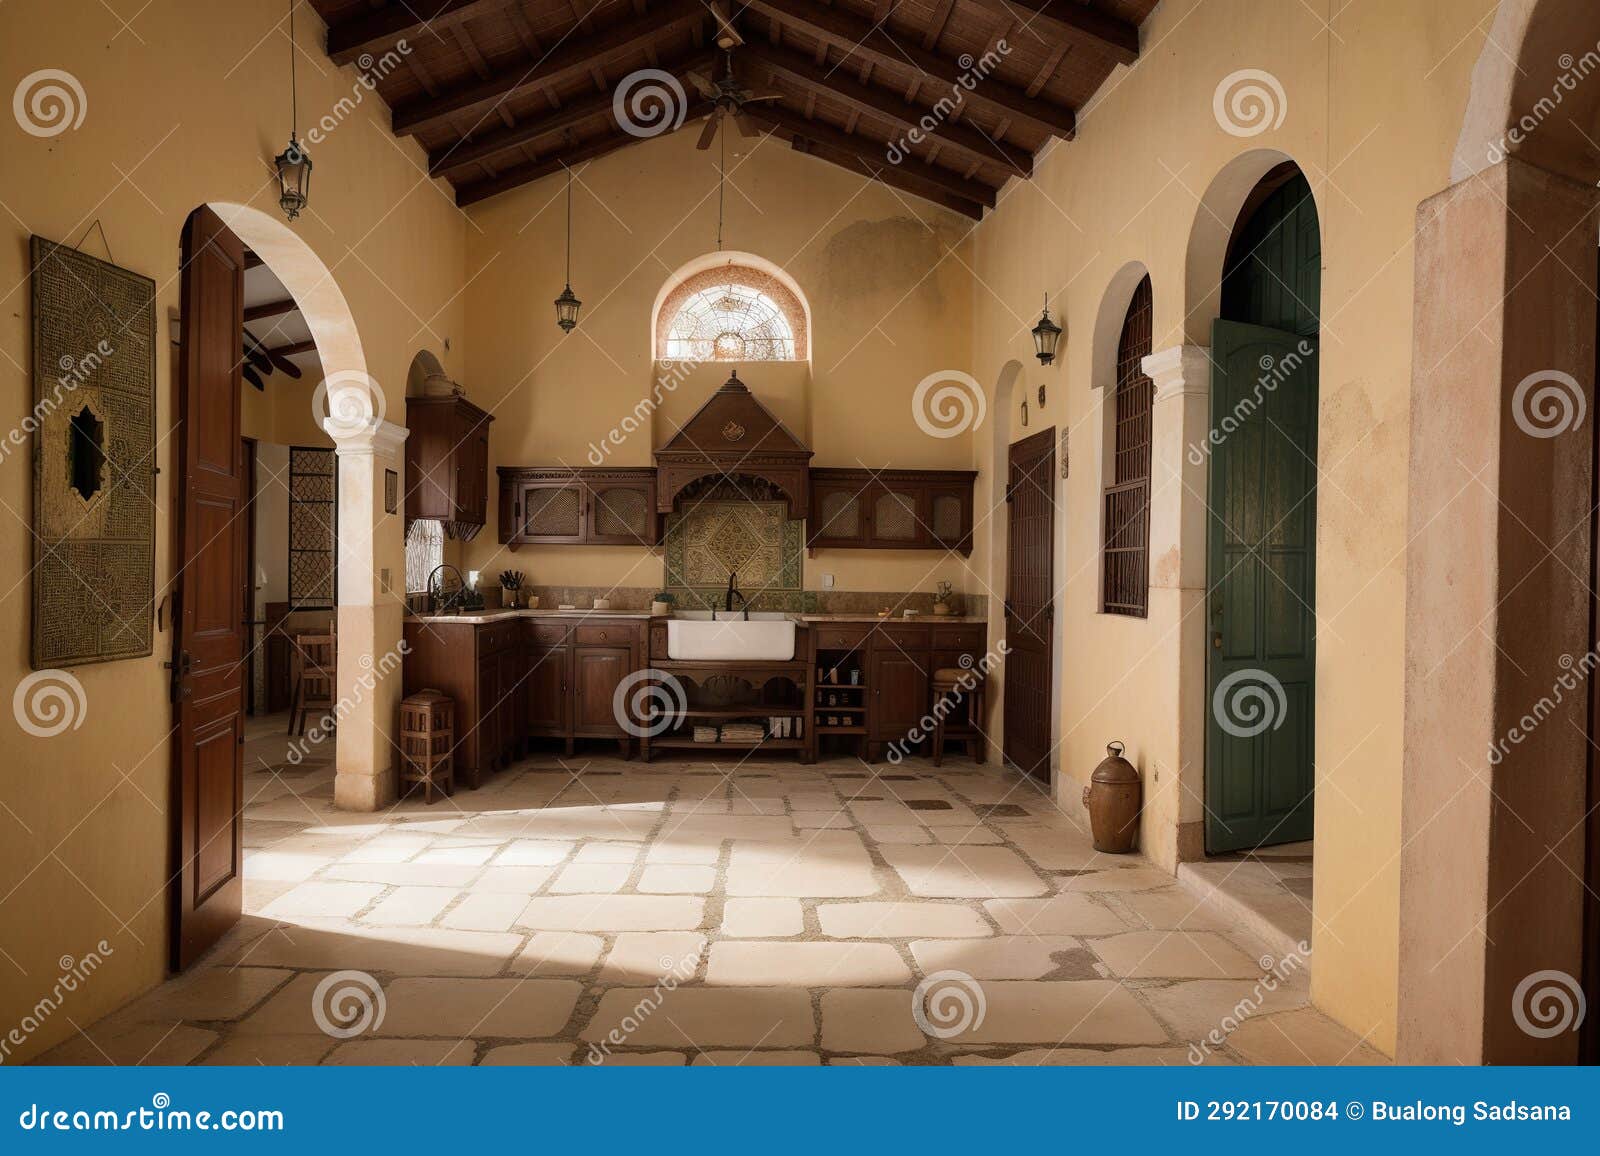 trinidad, cuba - october 2019 : interior of a colonial style kitchen inside the heritage home of palacio brunet or museo romantico